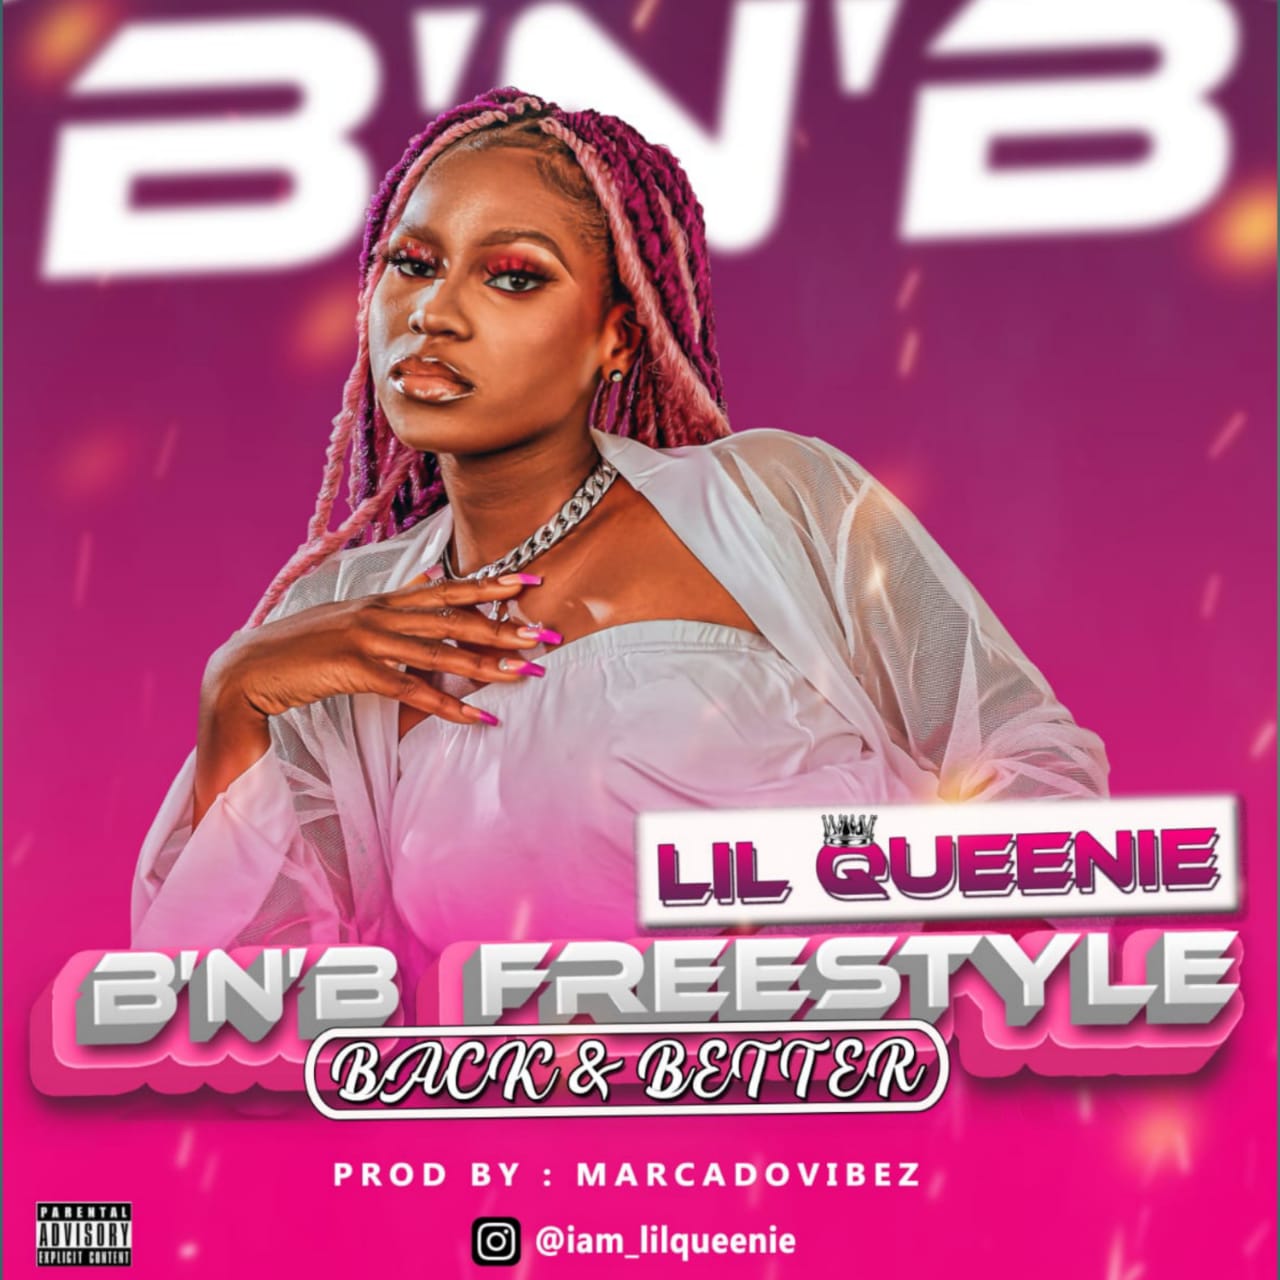 Lil Queenie – B’N’B Freestyle Back and Better (MP3/MP4)